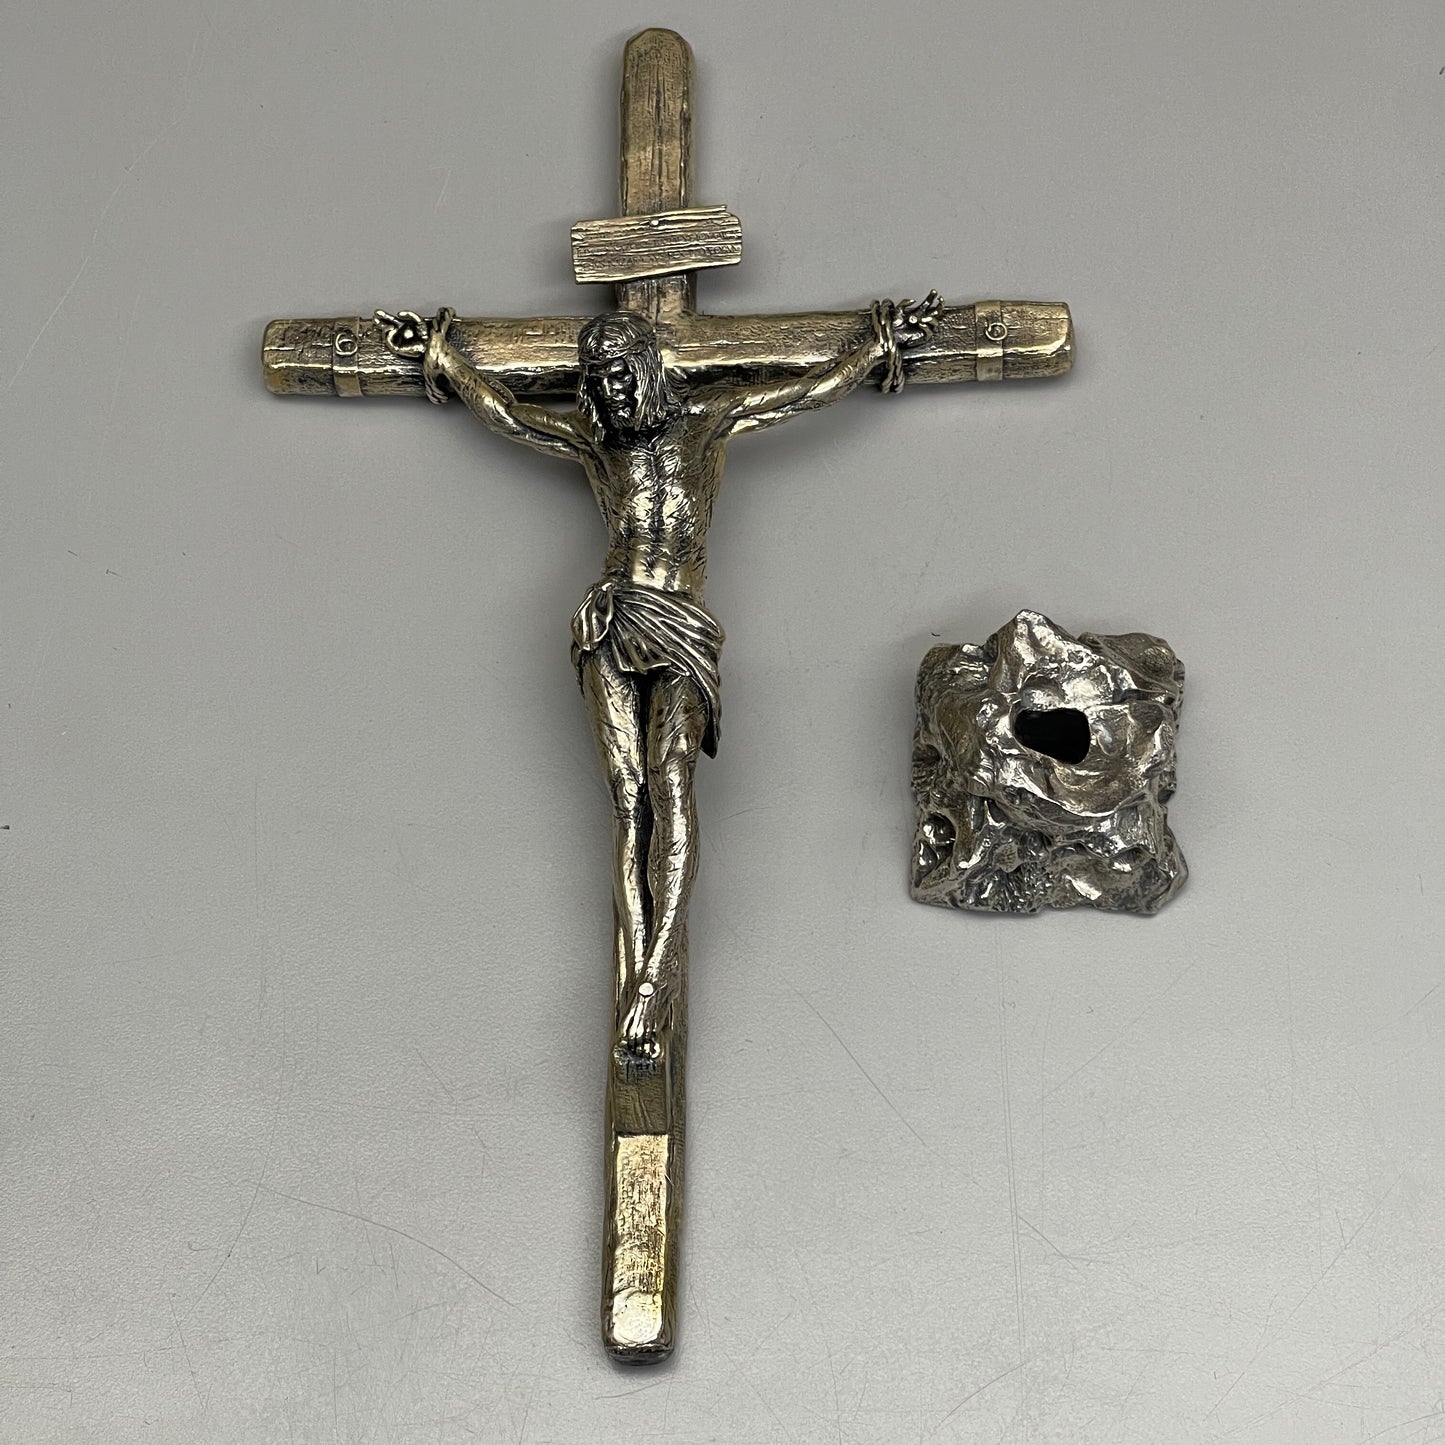 SILVER STATUES The Price He Paid XL 30+ Troy oz .925 Sterling Silver Jesus on the Cross Crucifix (New)